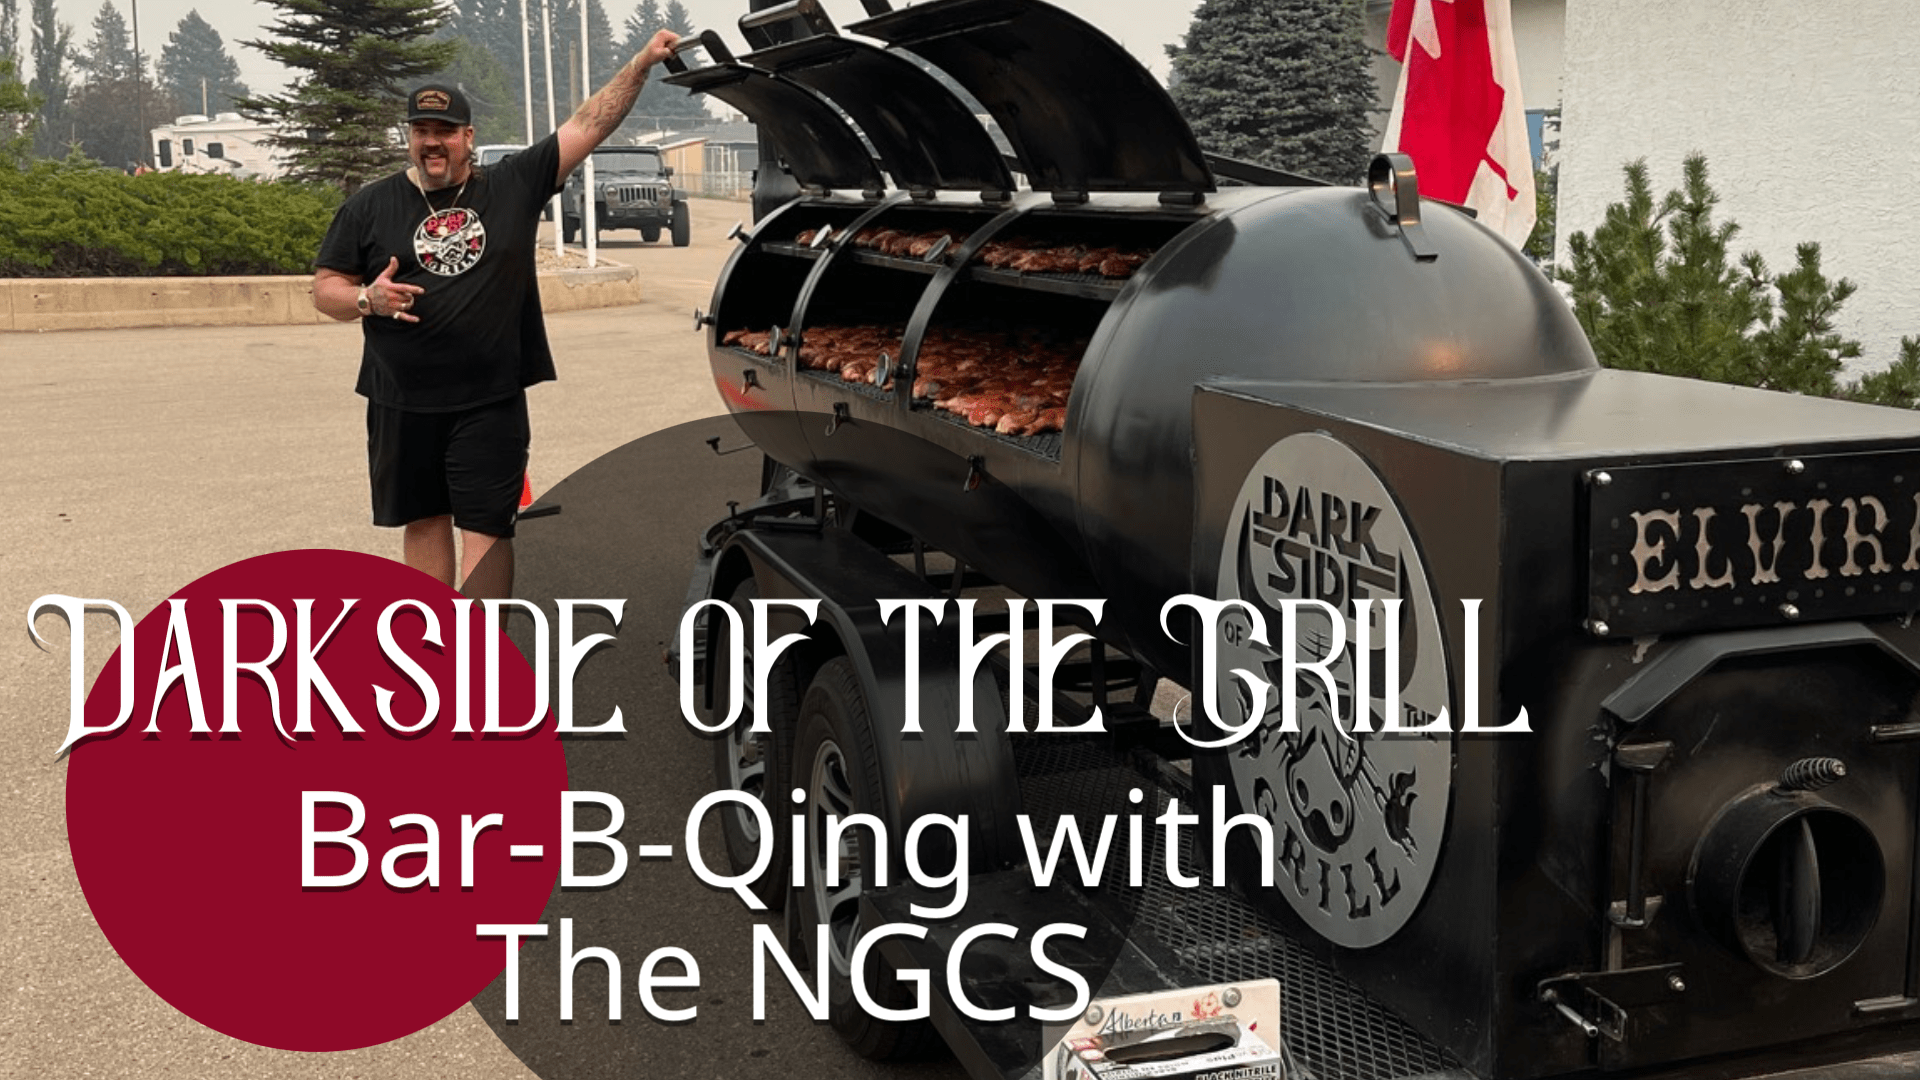 Let’s talk about pulled Pork with Darkside of the Grill